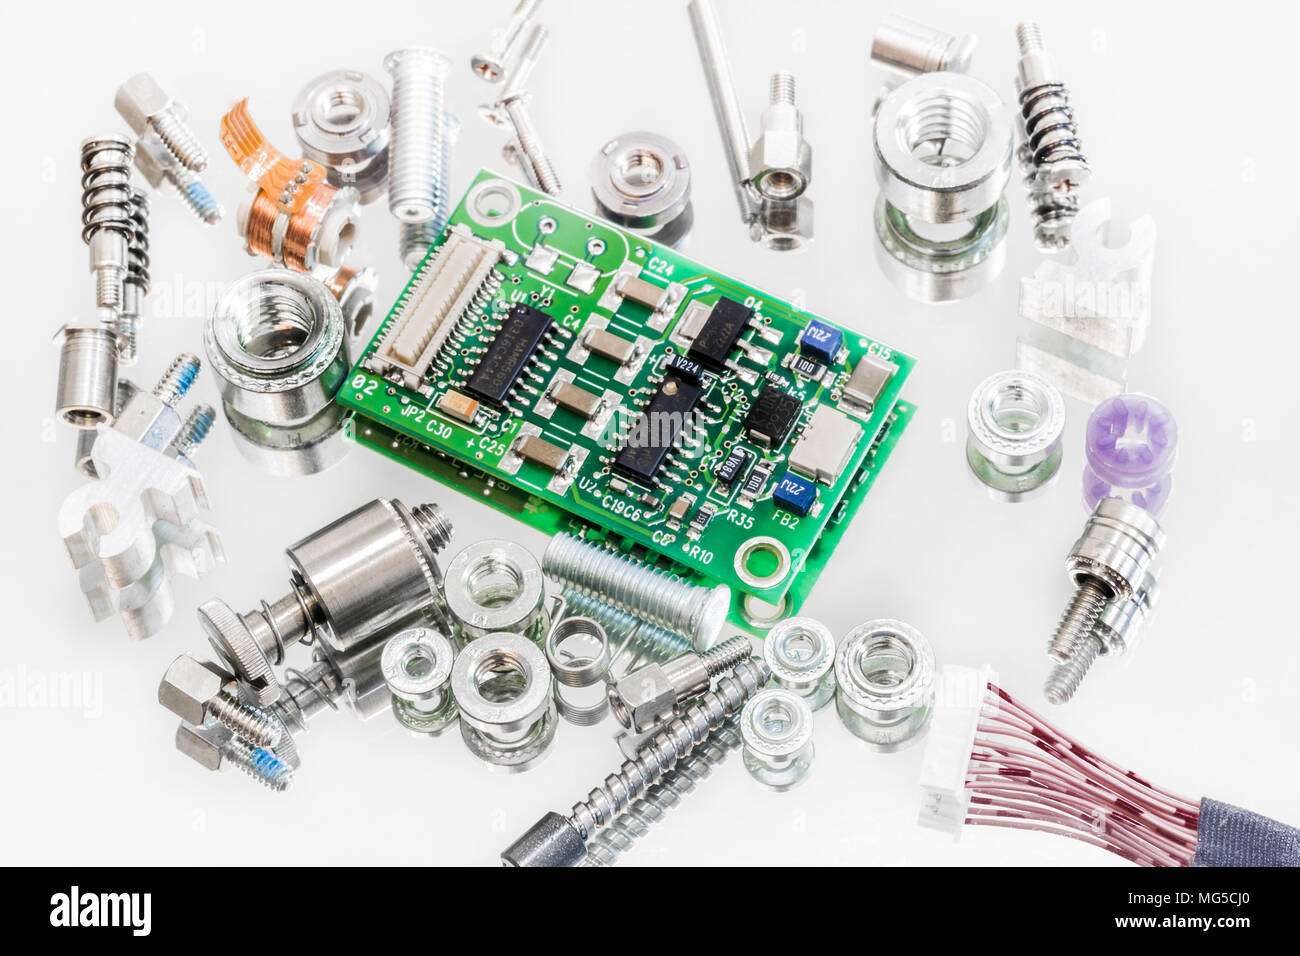 Miscellaneous hardware found inside a personal computer Stock Photo - Alamy